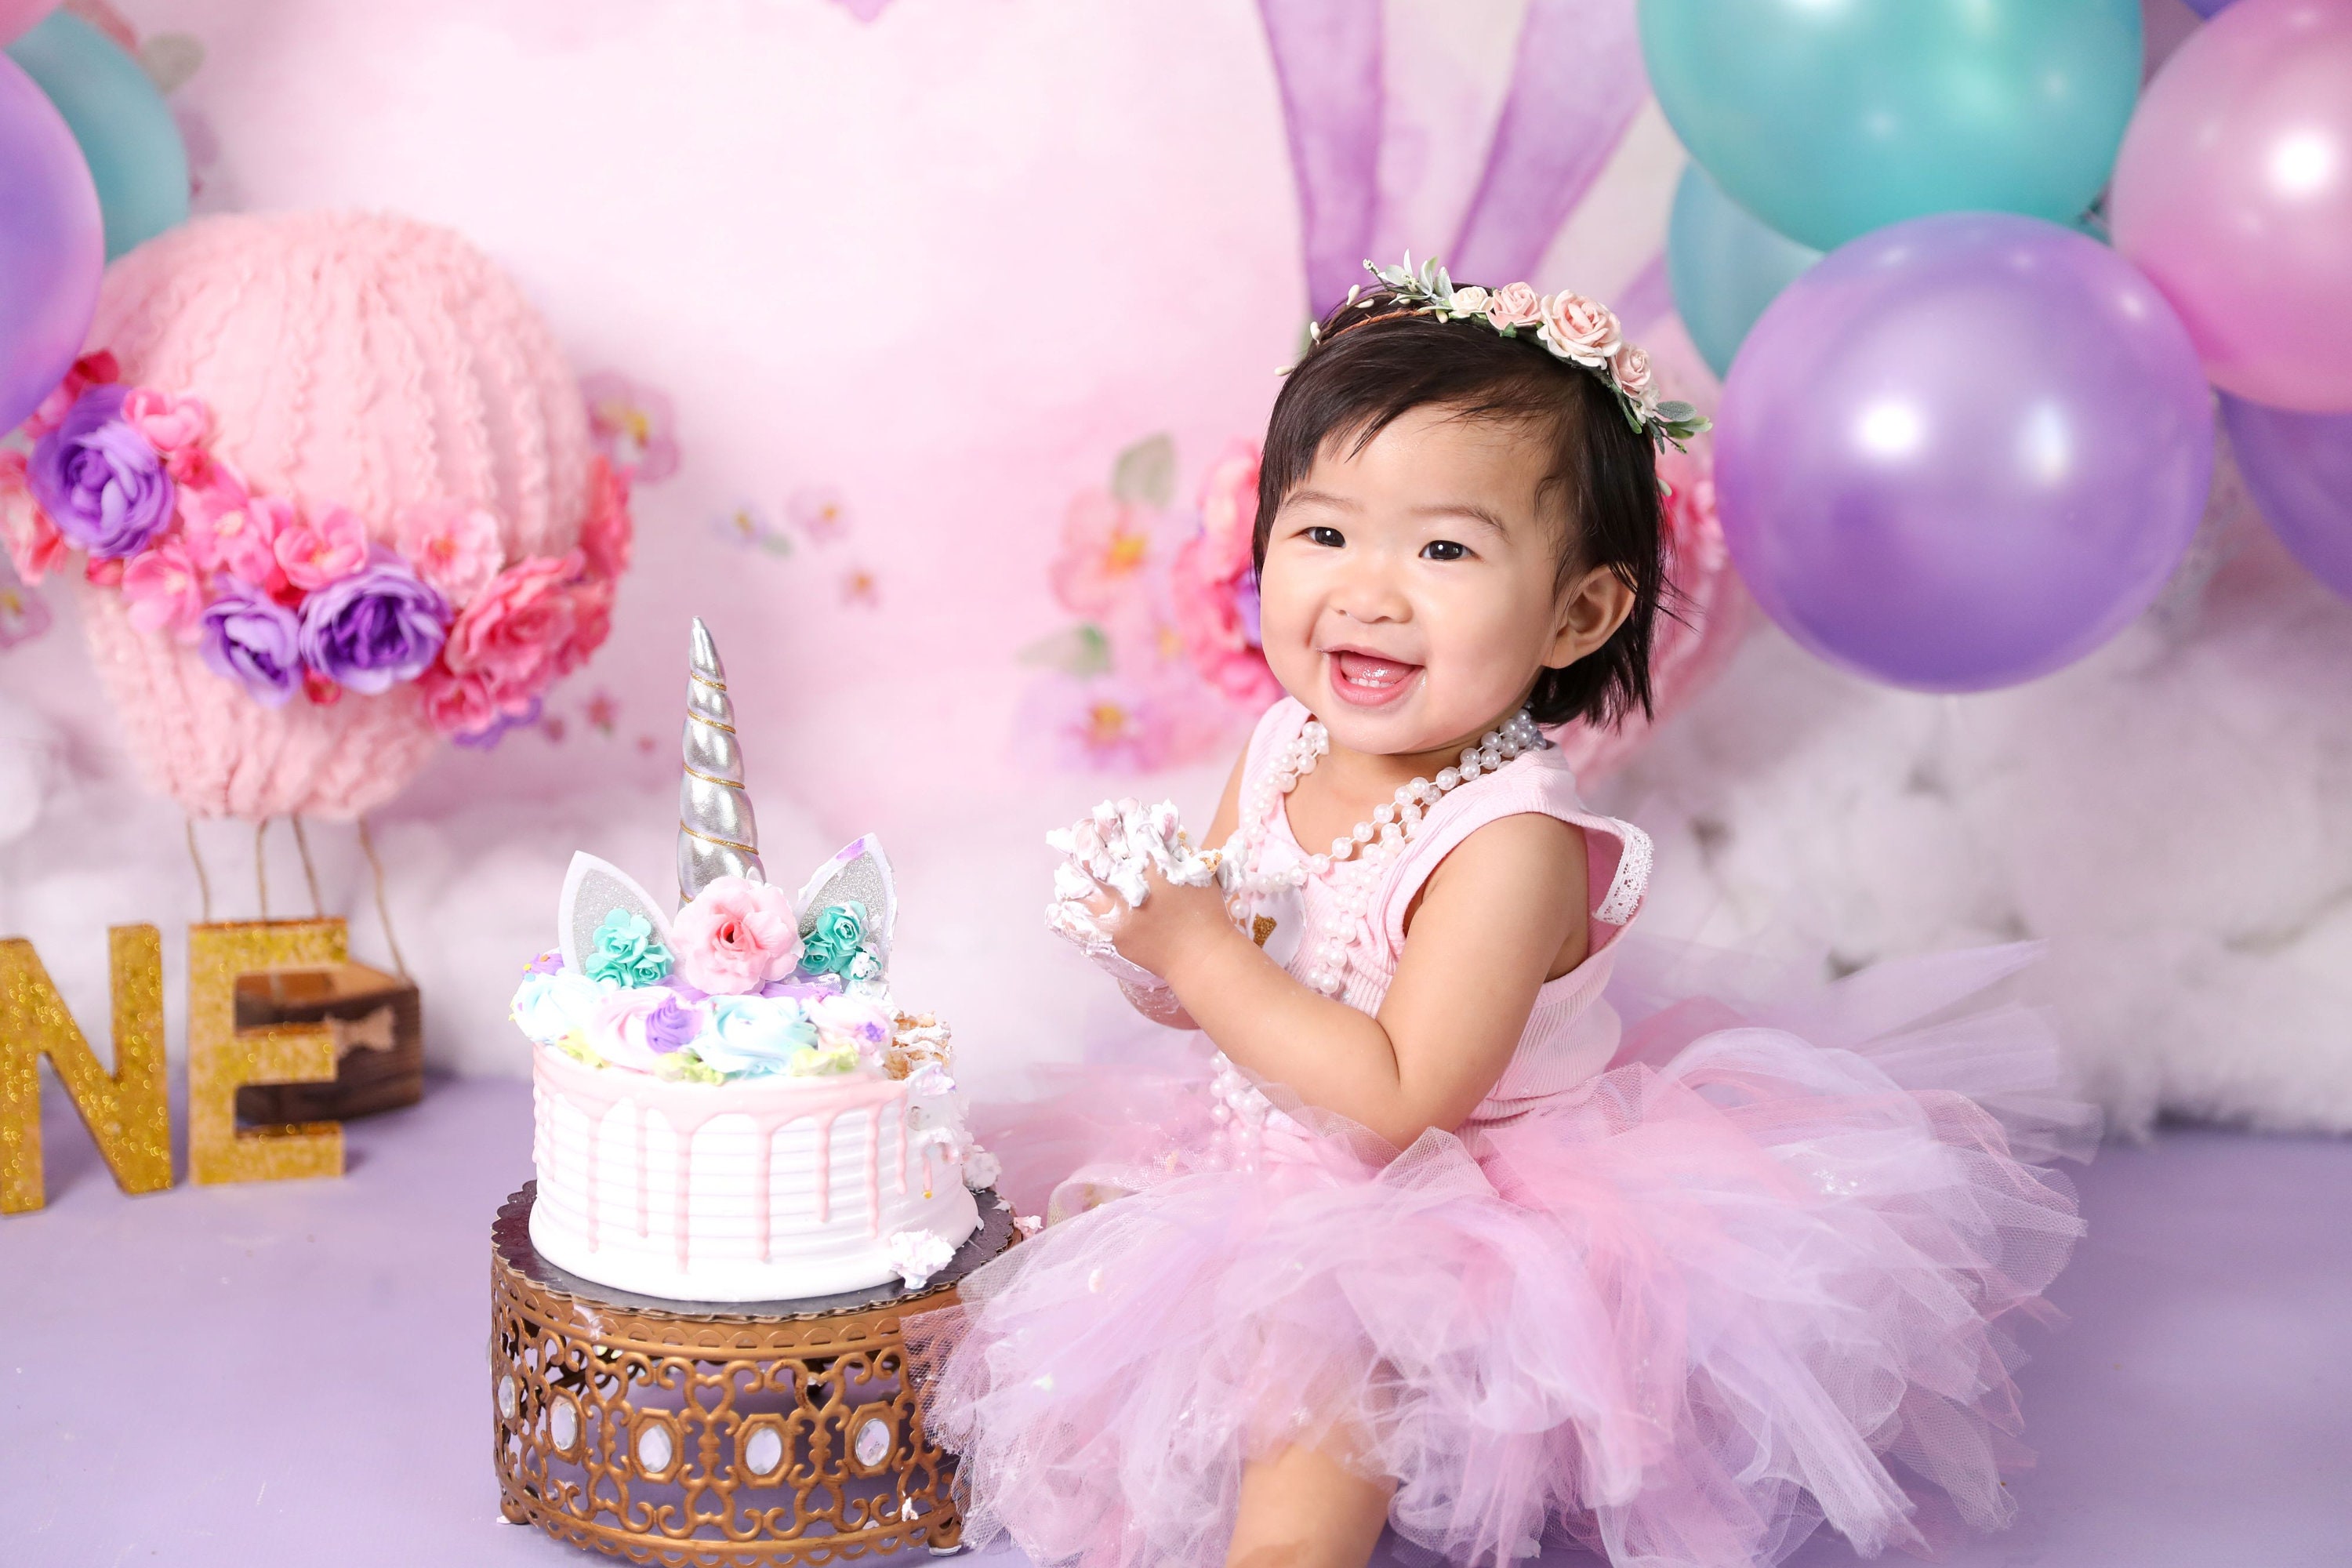 This Baby Girl is ONE! – Northern Virginia Cake Smash Photographer – Jess  Lynn Photography